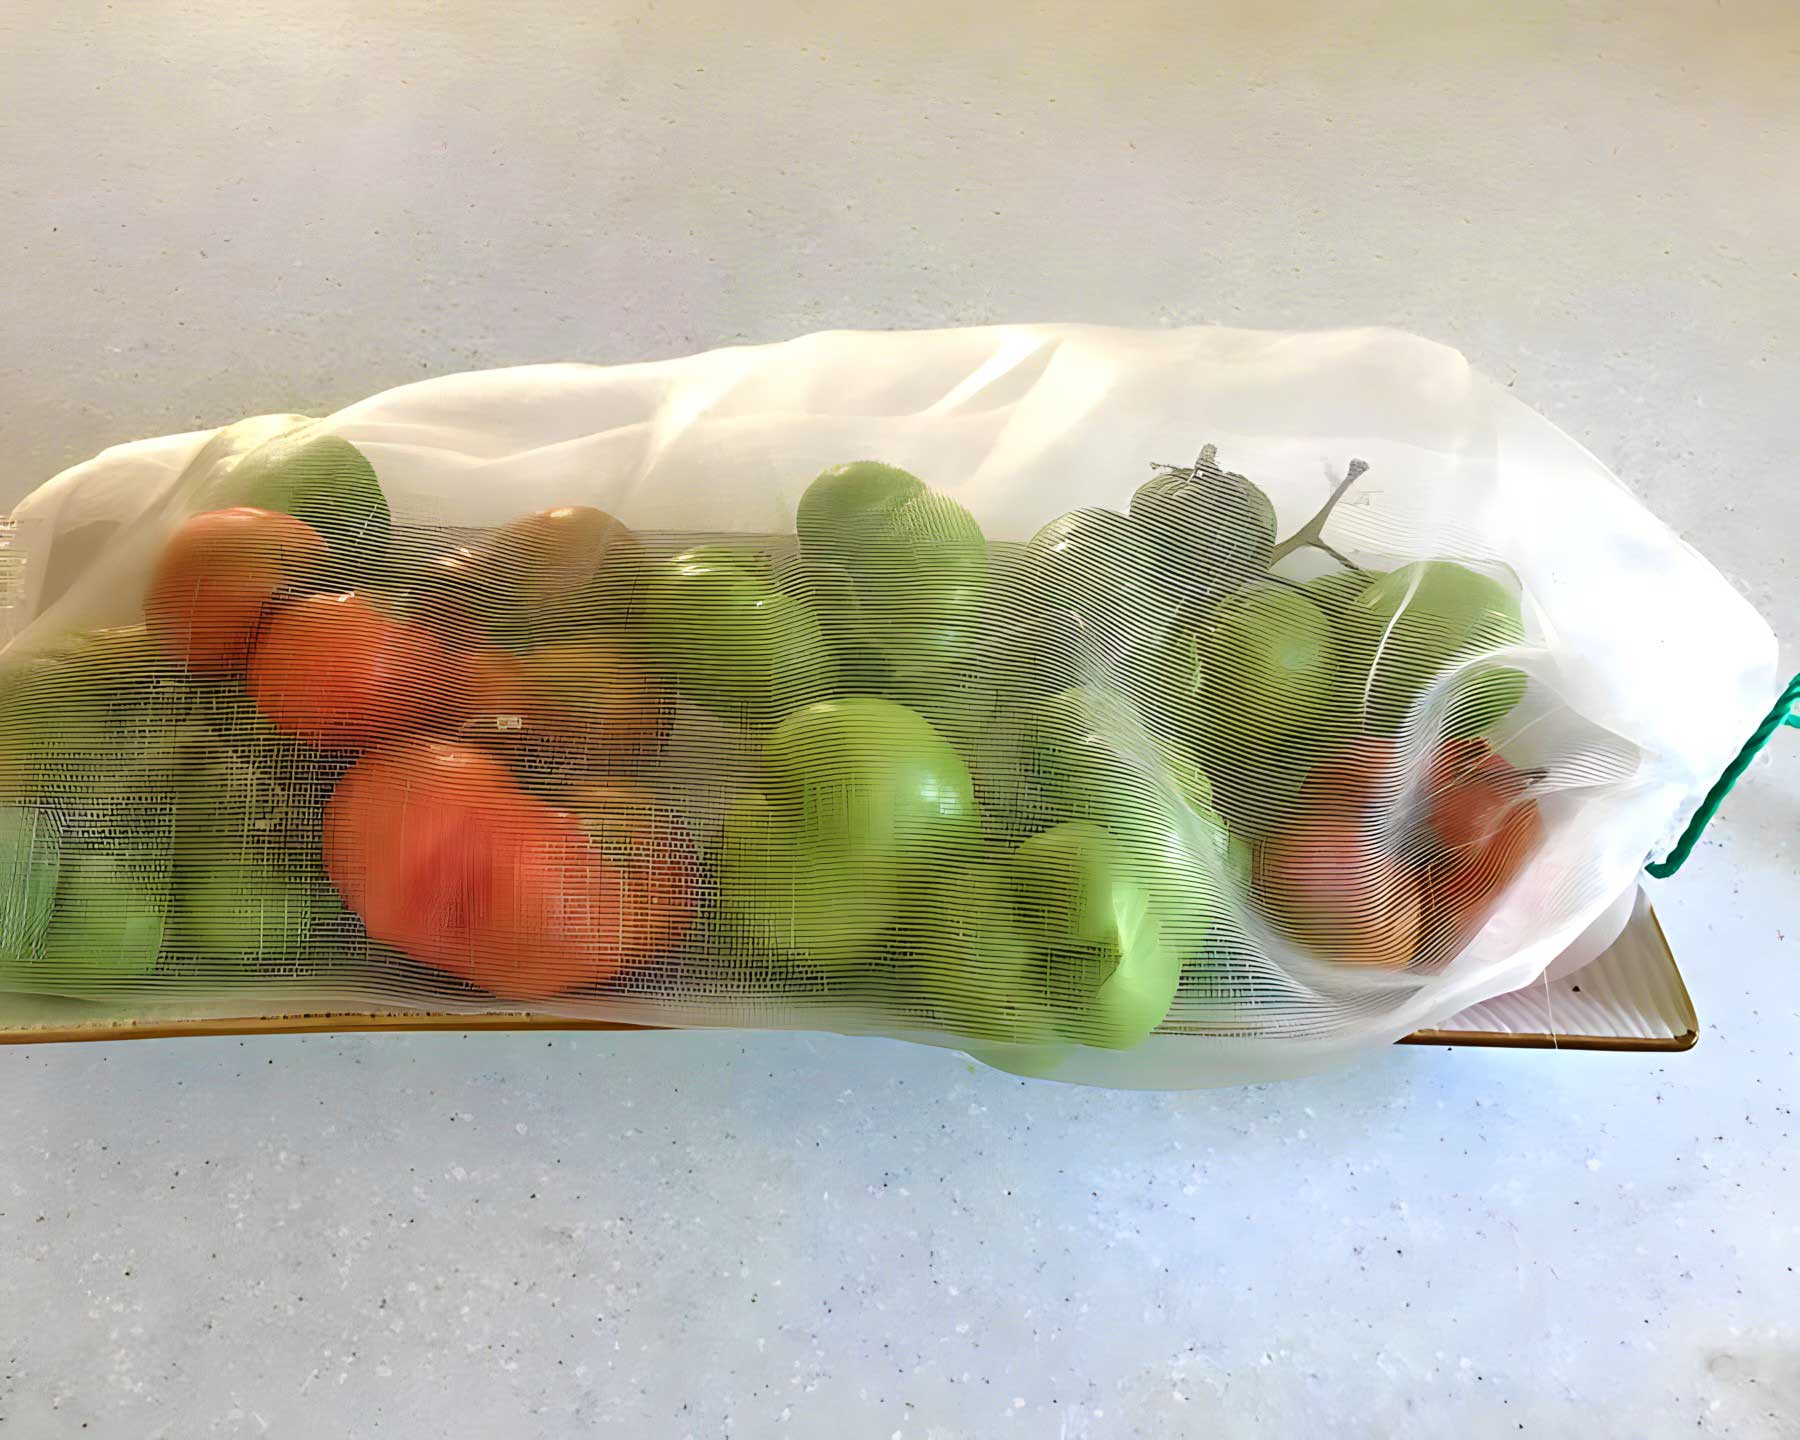 The small draw string bag protects the fruit from flies while it ripens